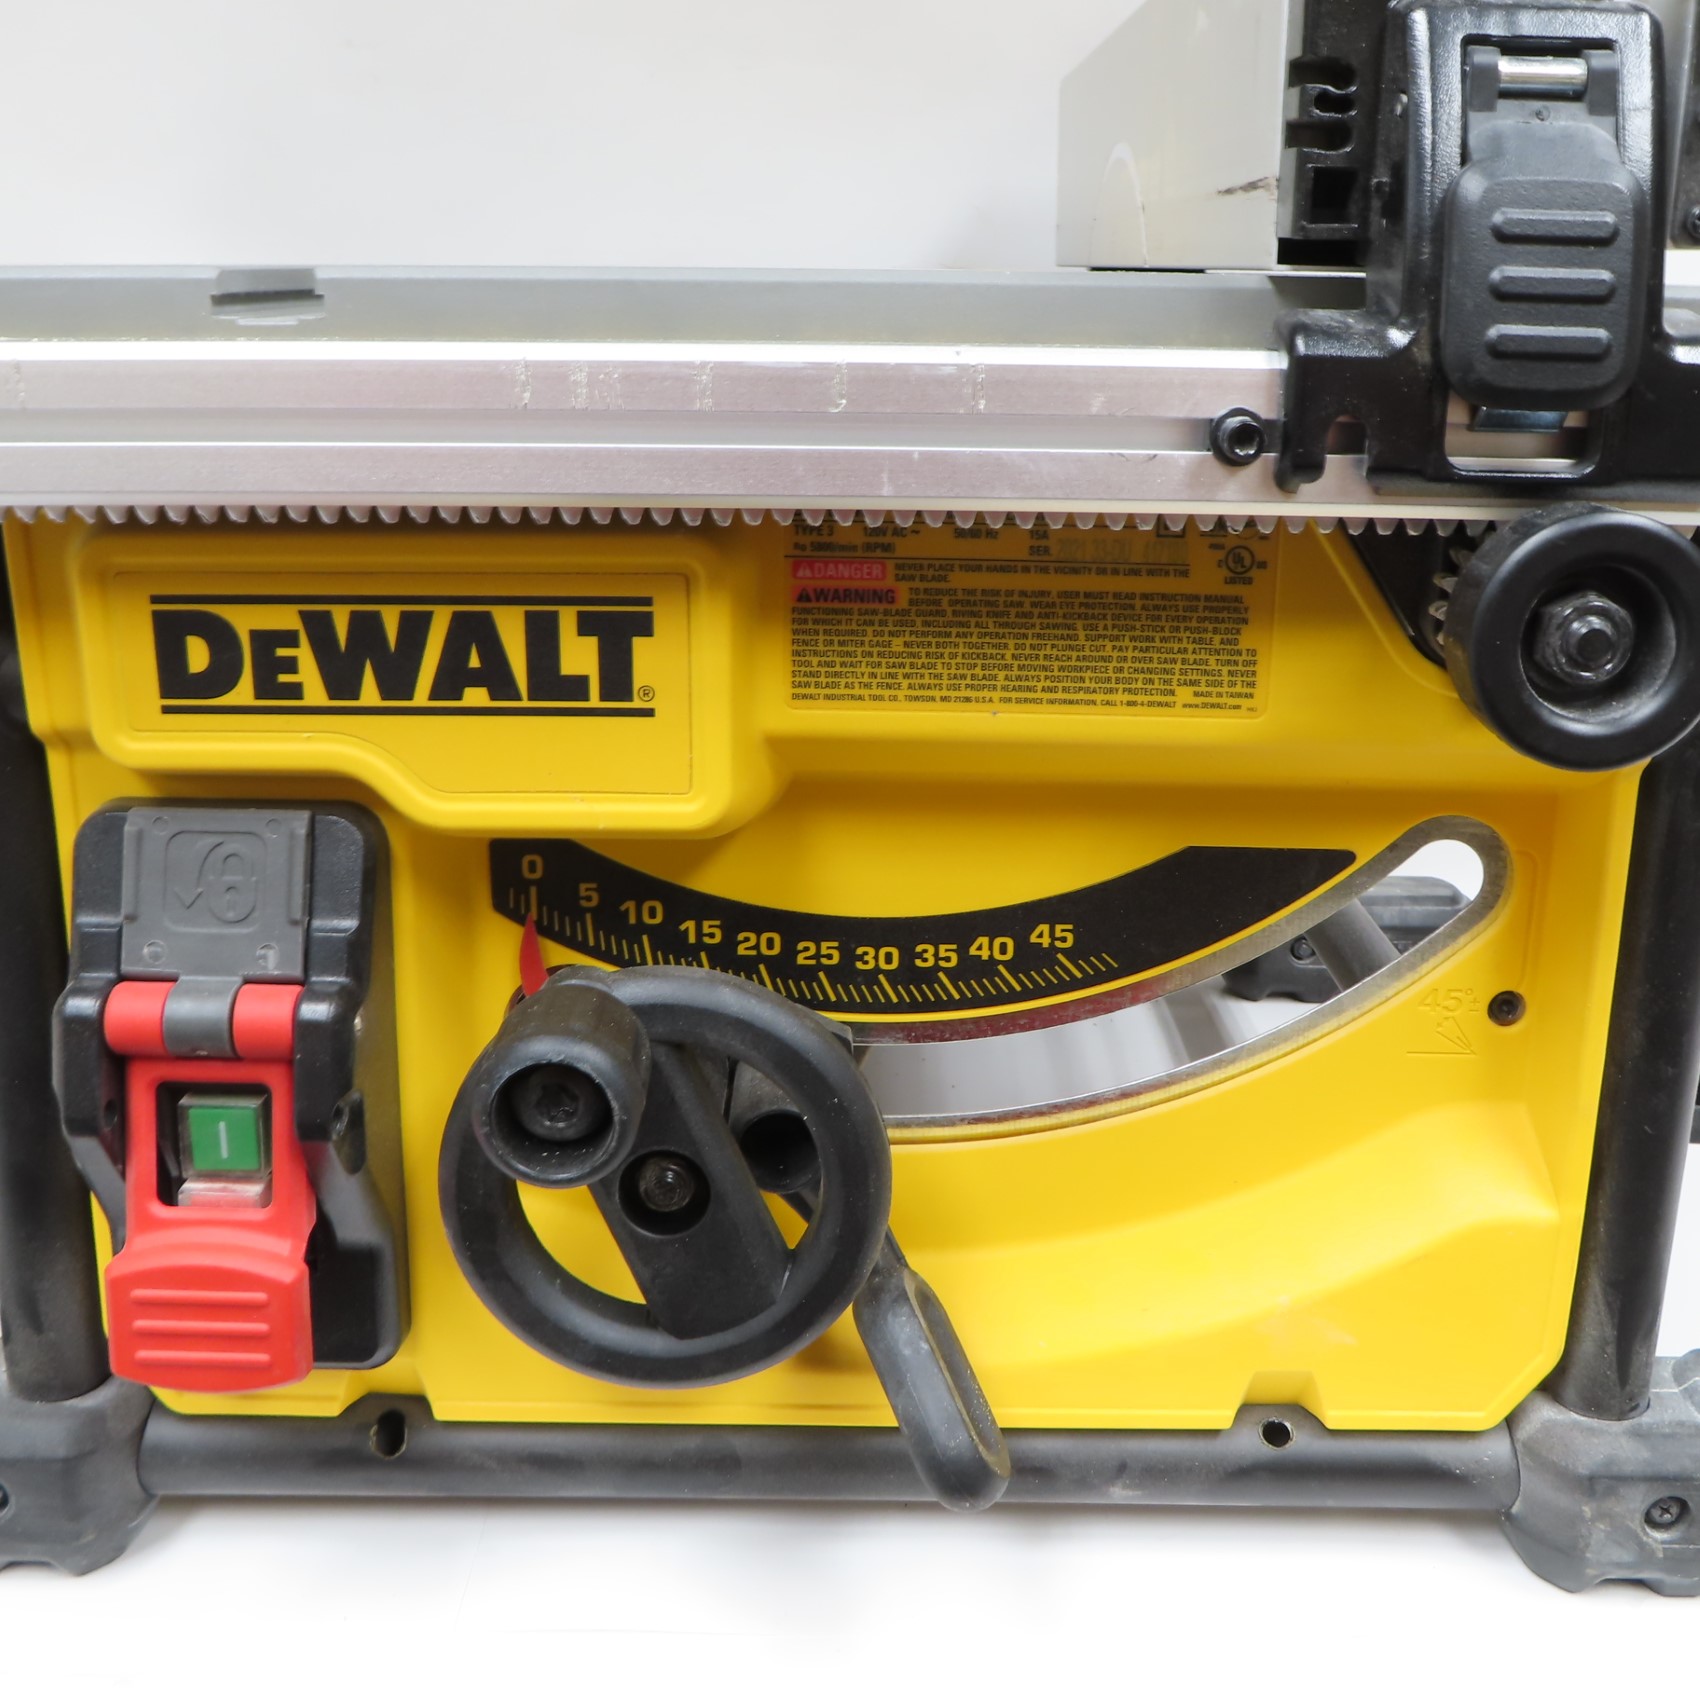 8-1/4 in. Compact Jobsite Table Saw